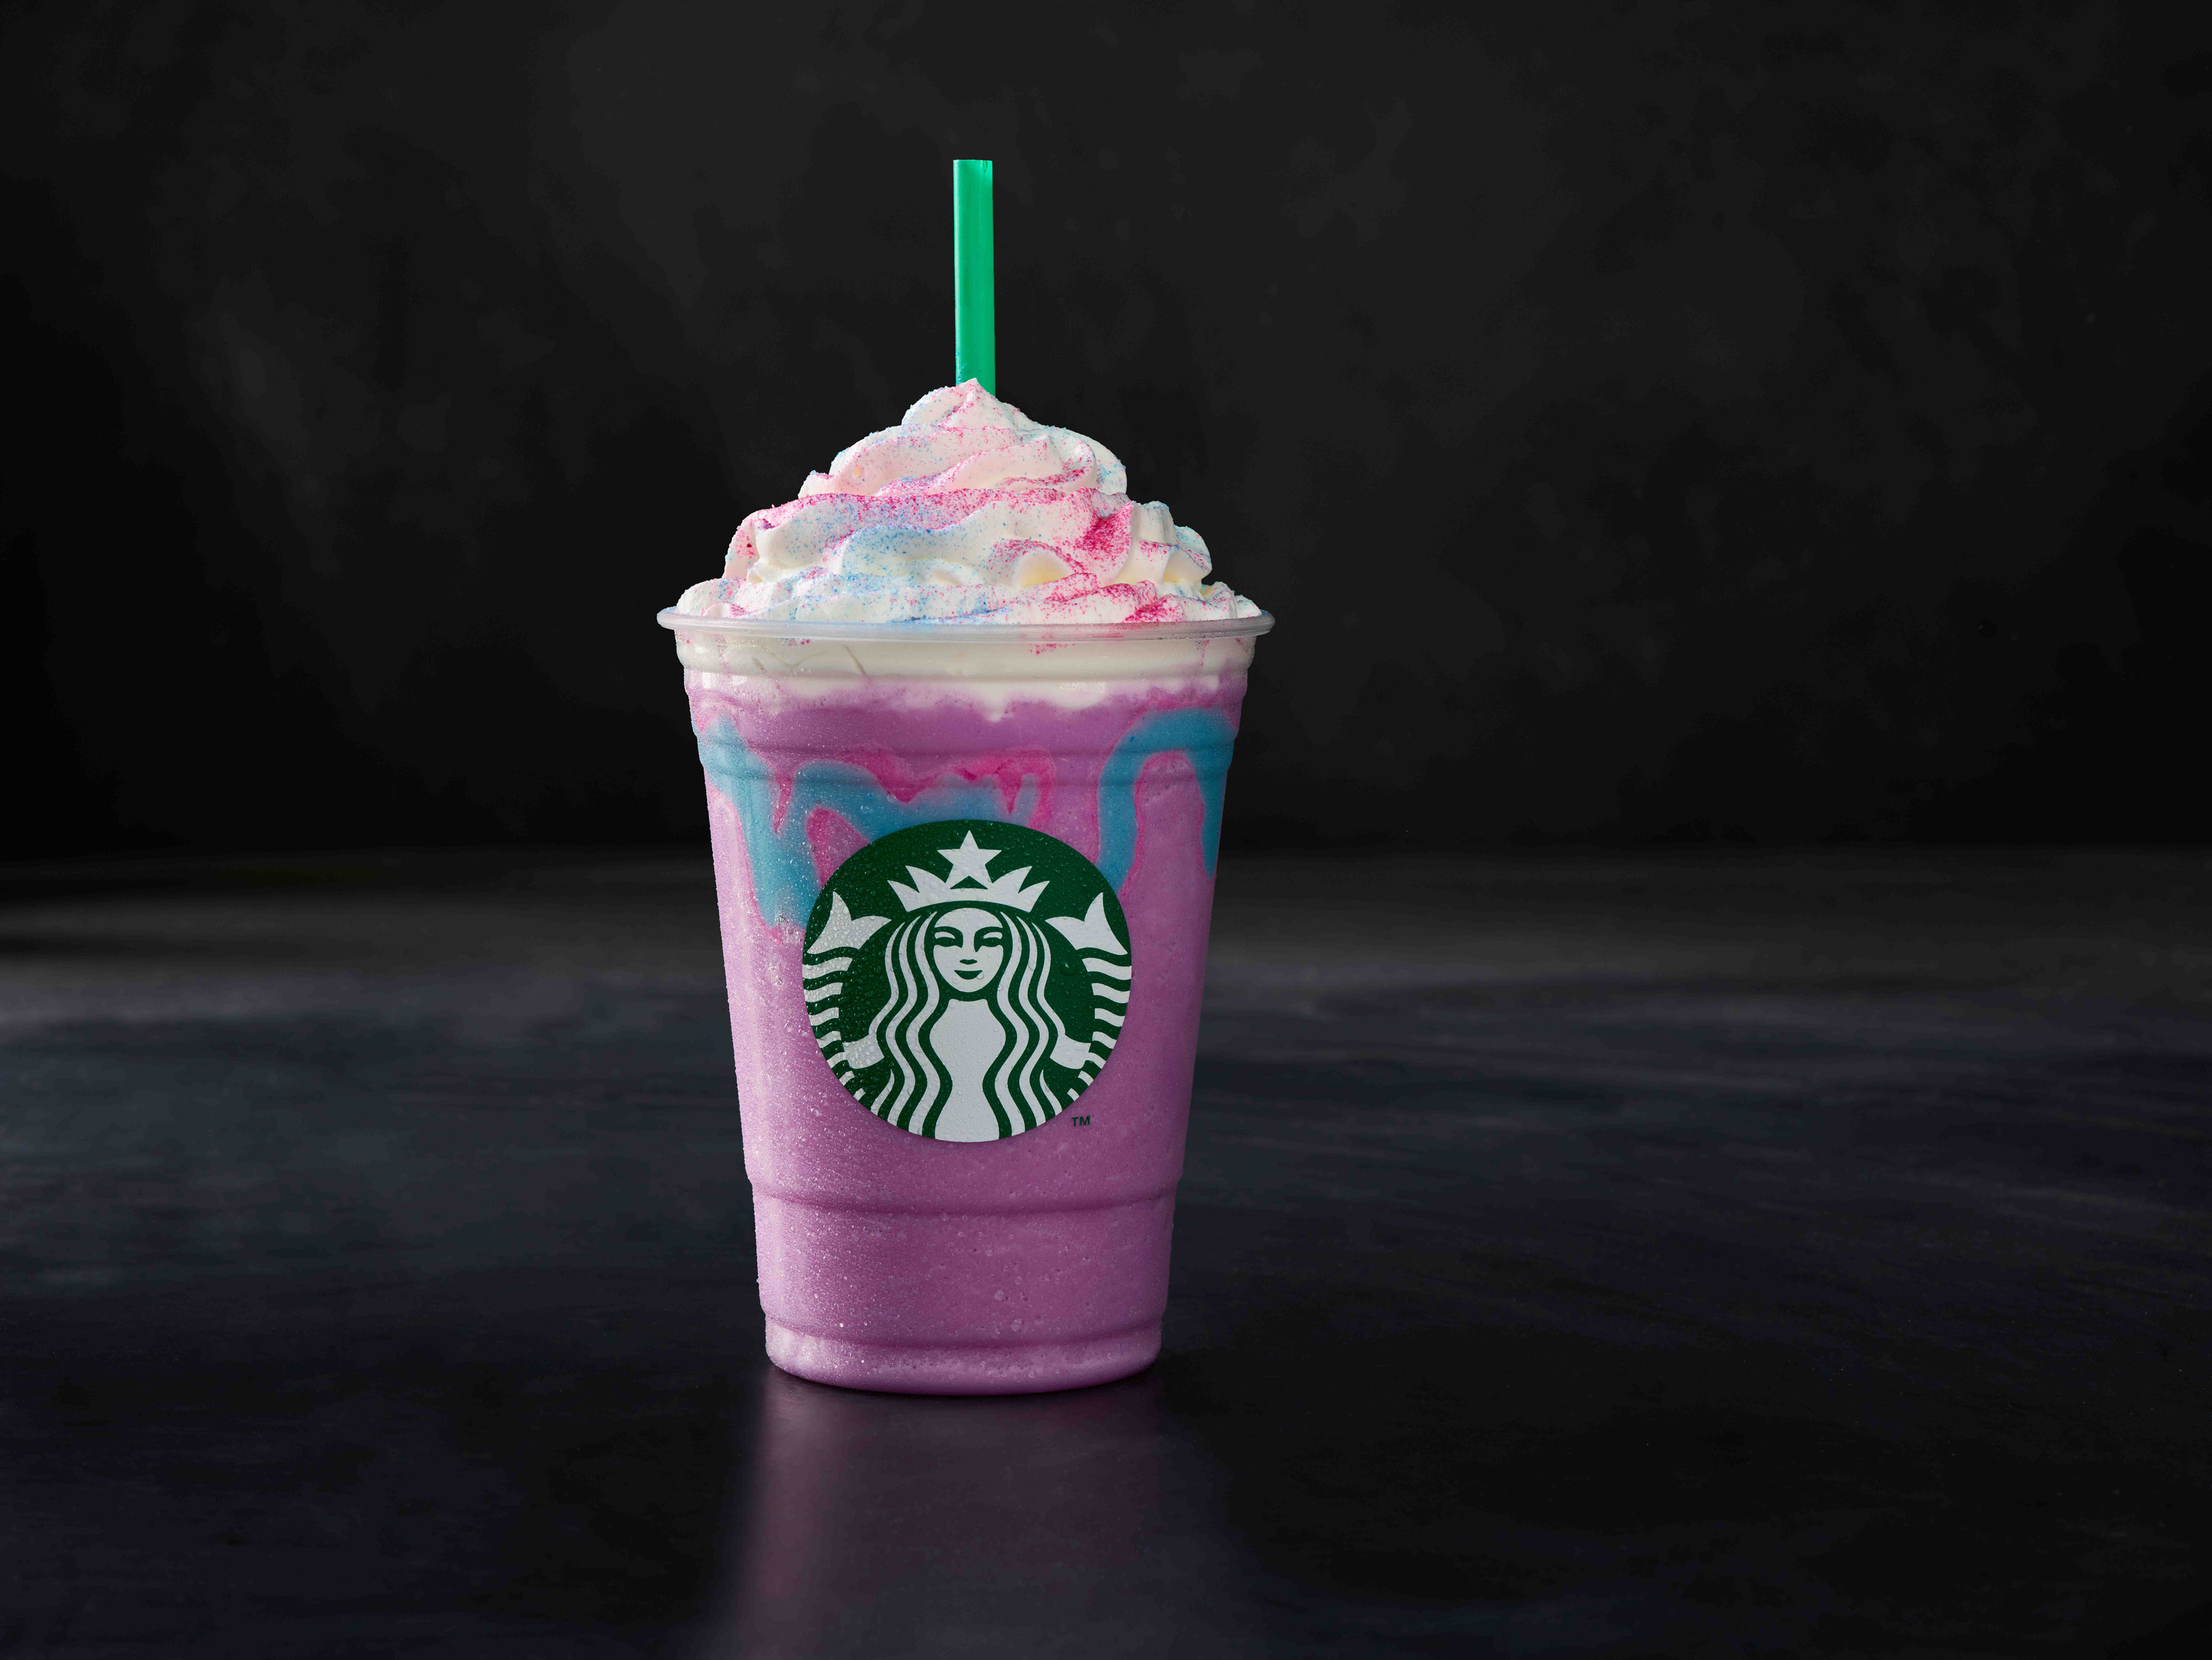 food stylist in Seattle - Unicorn Frappucino Starbucks limited promotion advertising photographed by Kathryn Barnard photographer